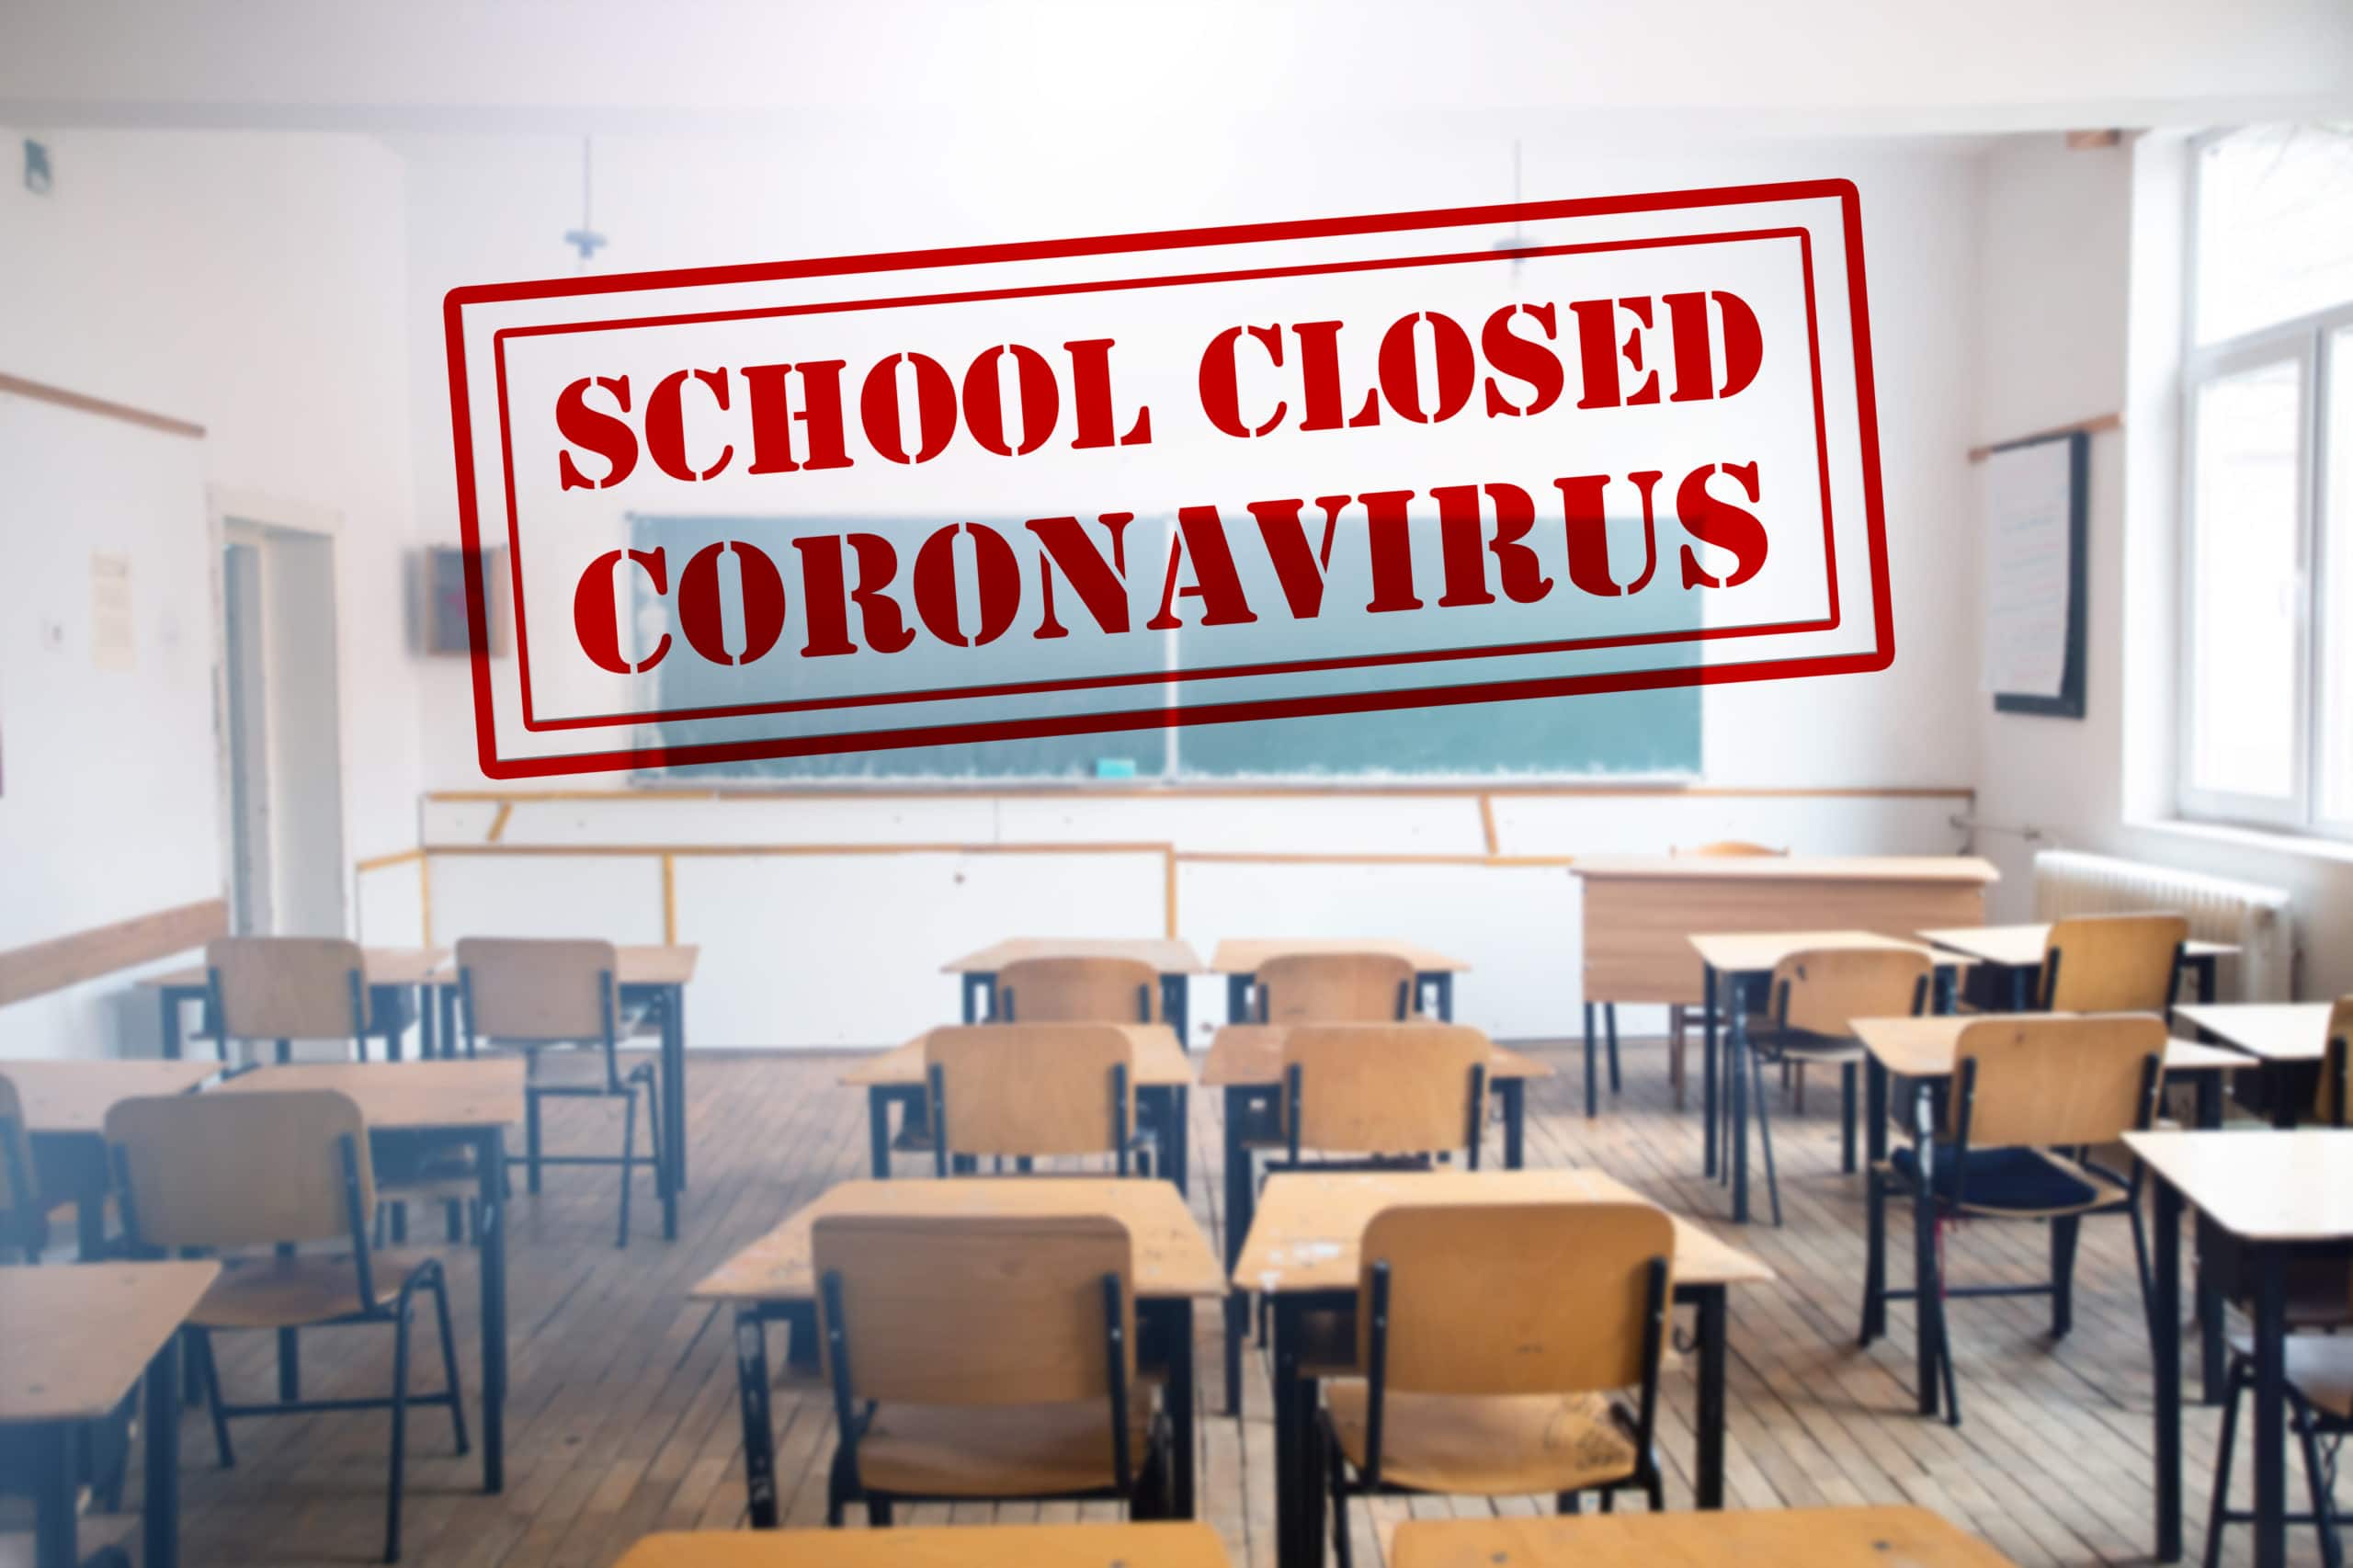 Plato Academy Palm Harbor closed due to COVID19, will reopen Friday